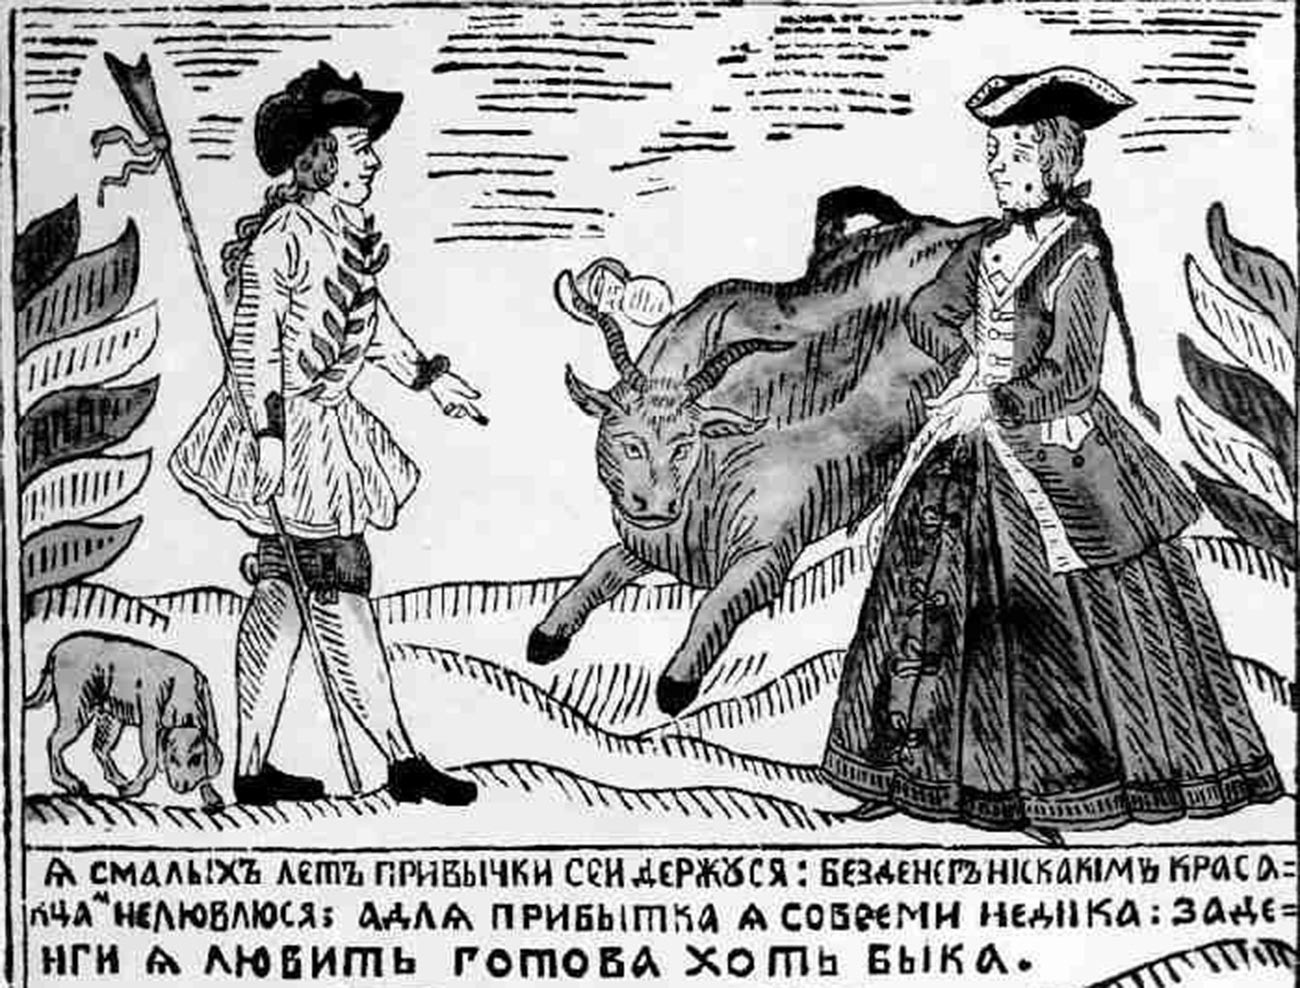 Lubok ‘A dandy and a venal woman’, 18th century. Caption: “I have had this habit since a young age: without money, I do not make love to any man, however handsome. I am not at all averse to making a profit and would be ready to make love to a bull for money.”